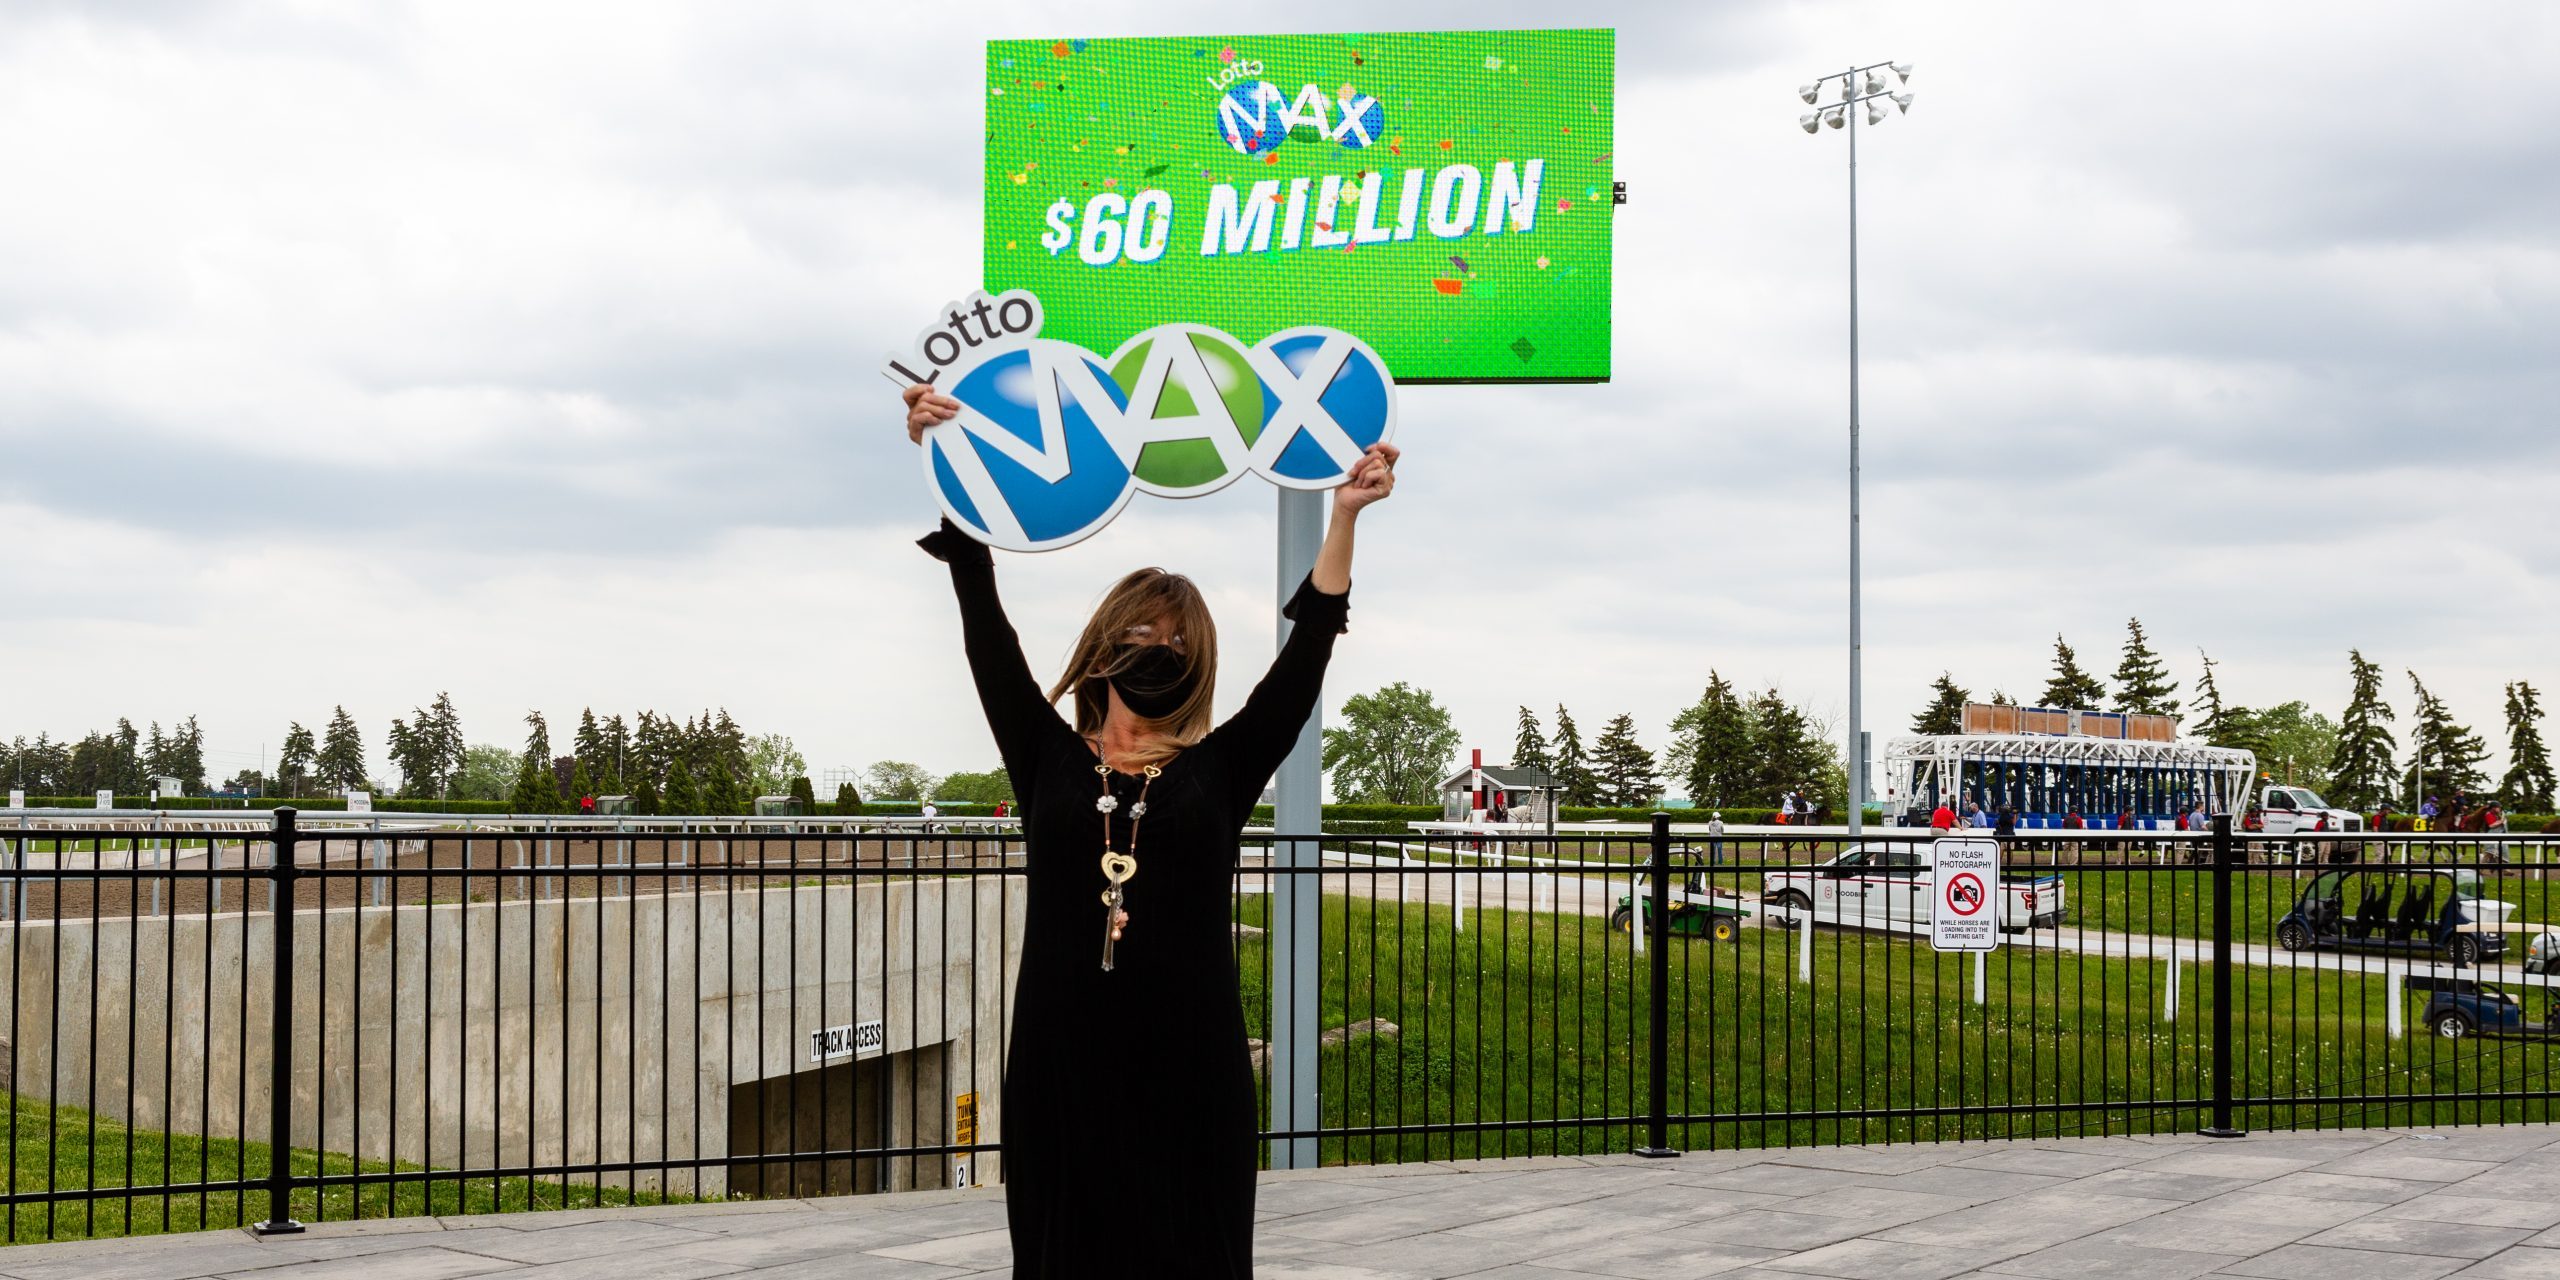 Hamilton woman wins $60 million Lotto Max draw: 'We have to use this money wisely'